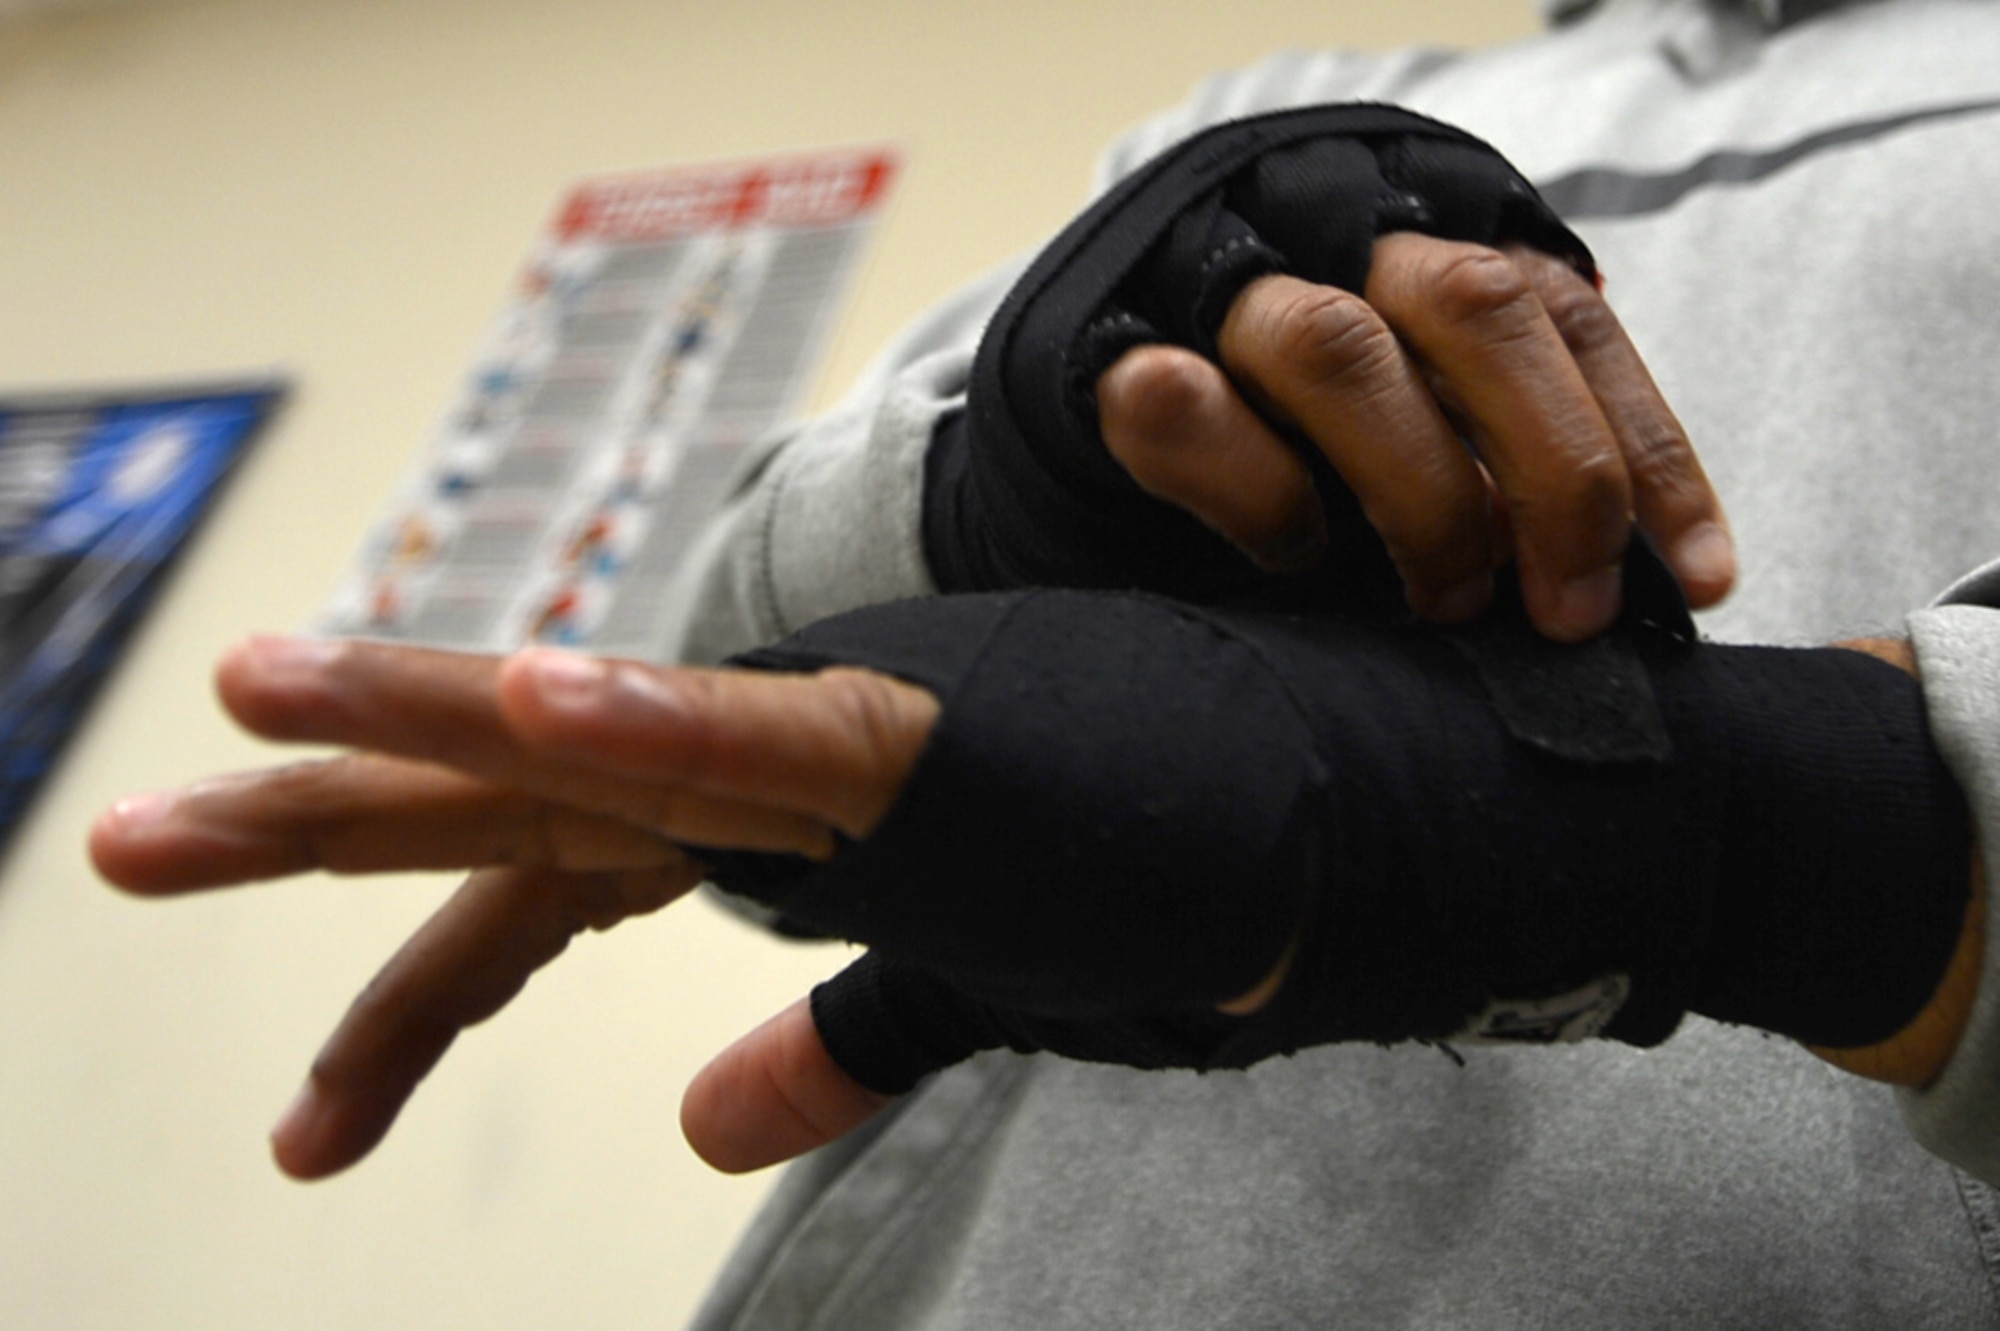 U.S. Air Force Tech. Sgt. Andre Penn, 20th Civil Engineer Squadron unaccompanied housing manager, wraps his hands prior to training at Team Robinson Mixed Martial Arts in Sumter, South Carolina, Nov. 7, 2017.